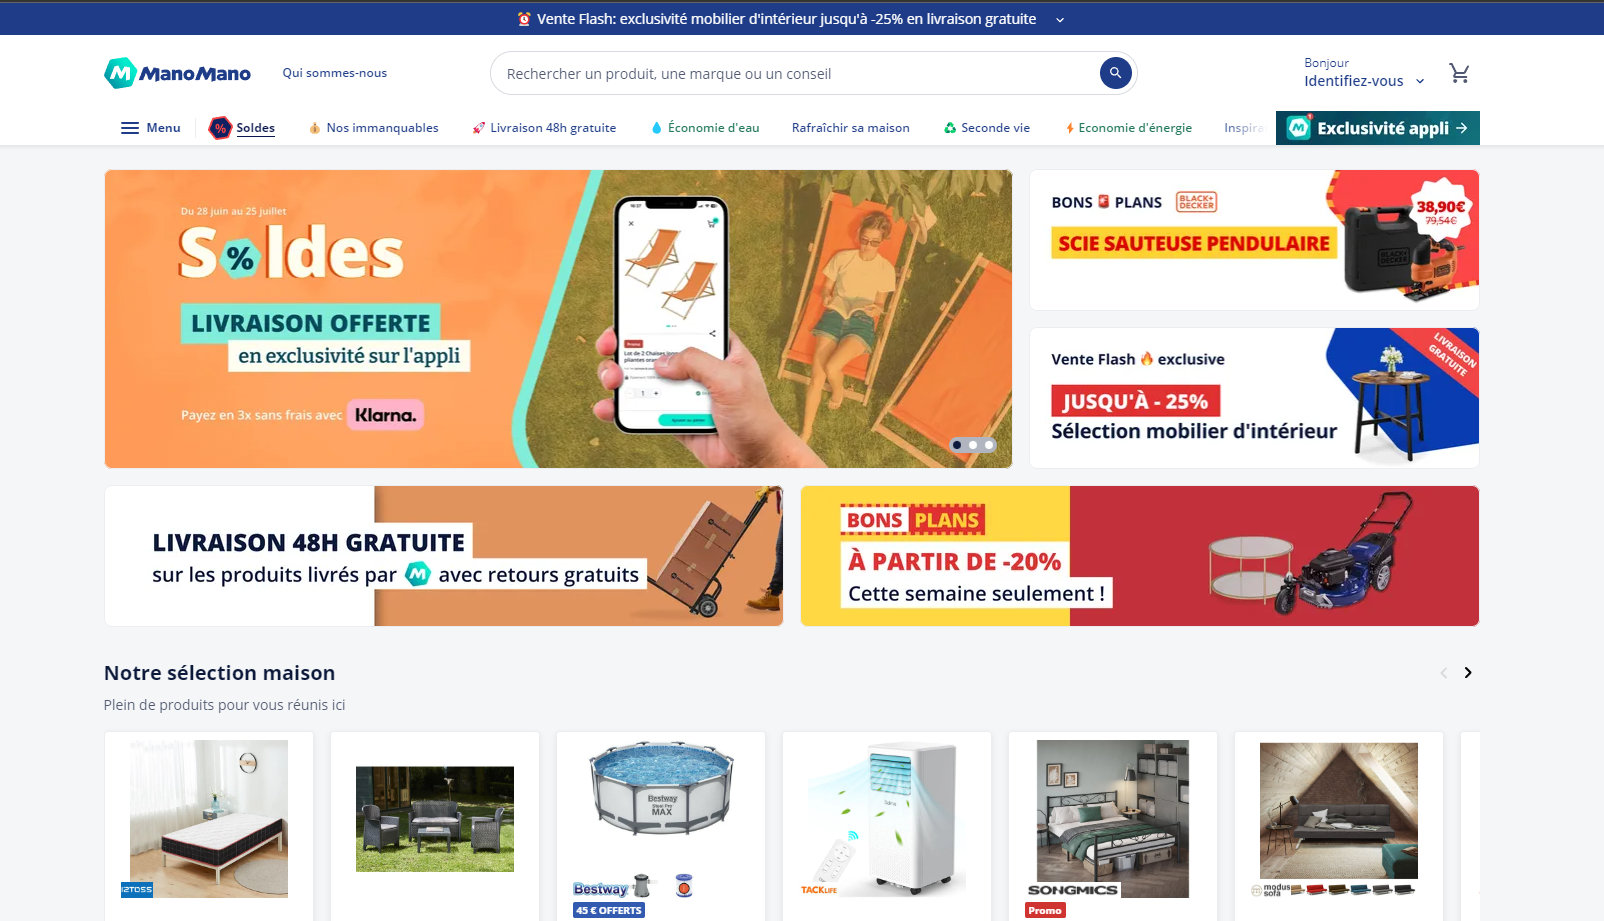 Top 10 Ecommerce Sites in Spain - Ecommerce Guide